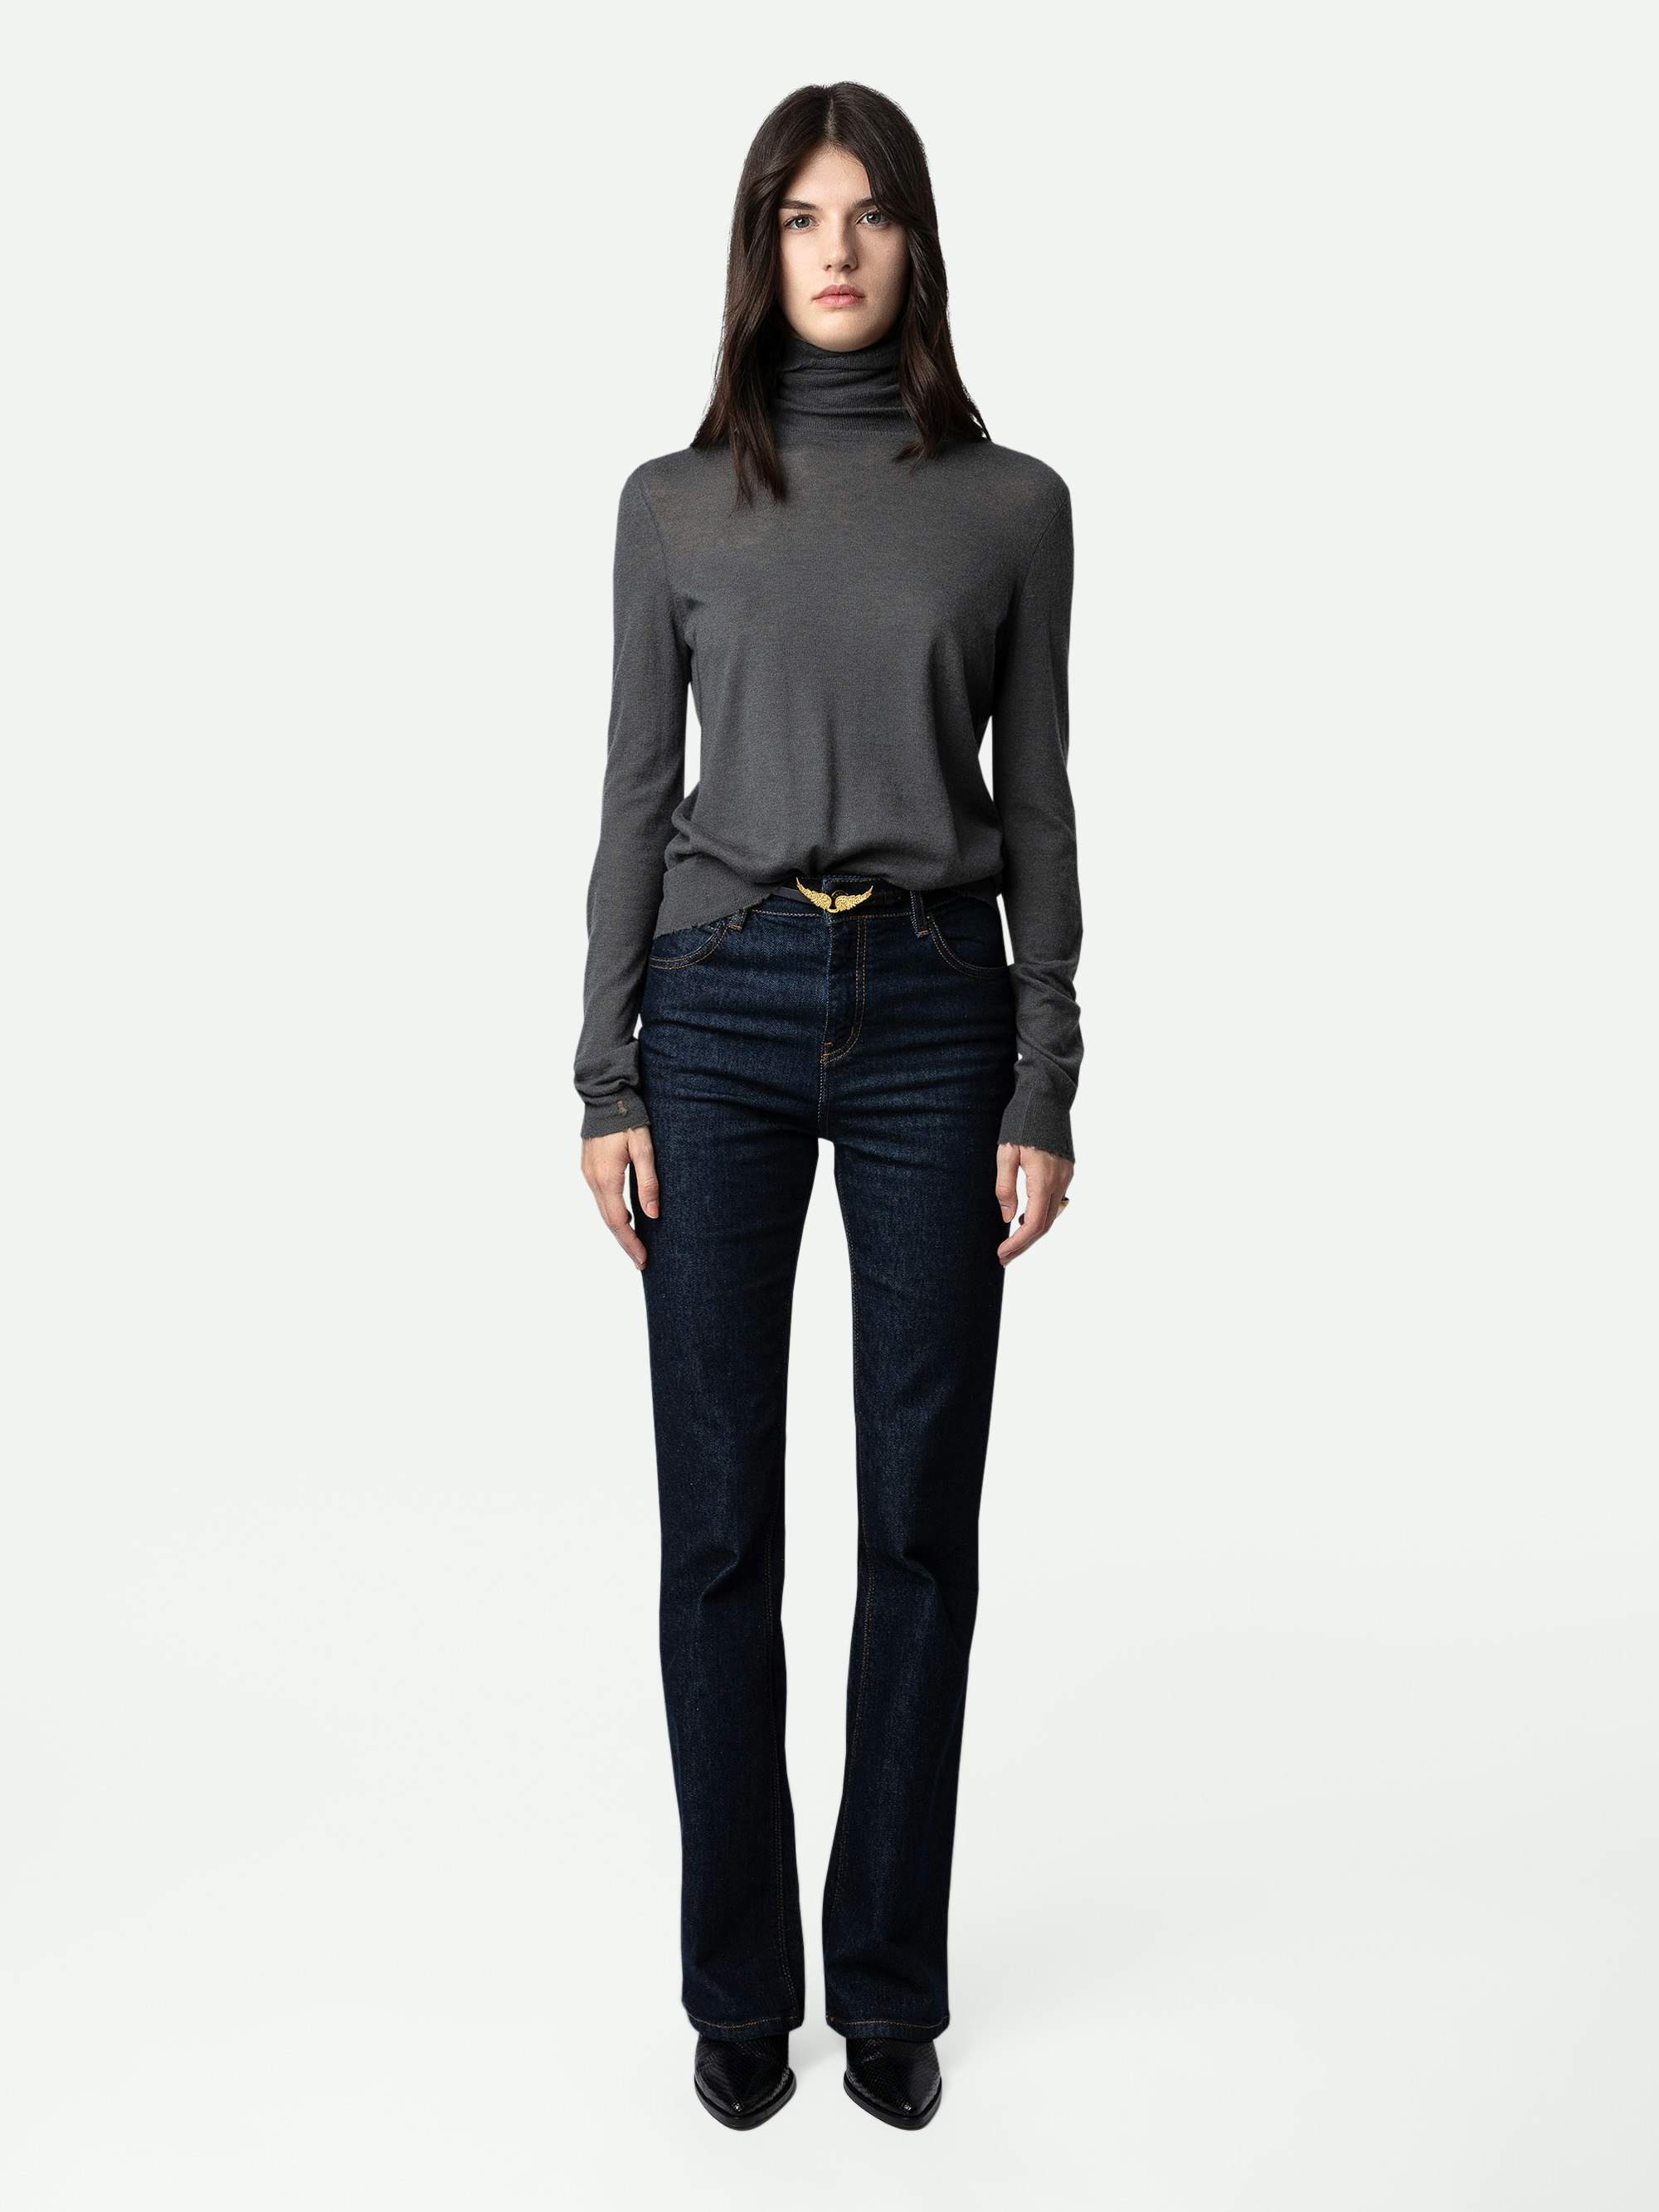 Bobby Cashmere Sweater - Women's Bobby grey feather cashmere turtleneck jumper with long sleeves.